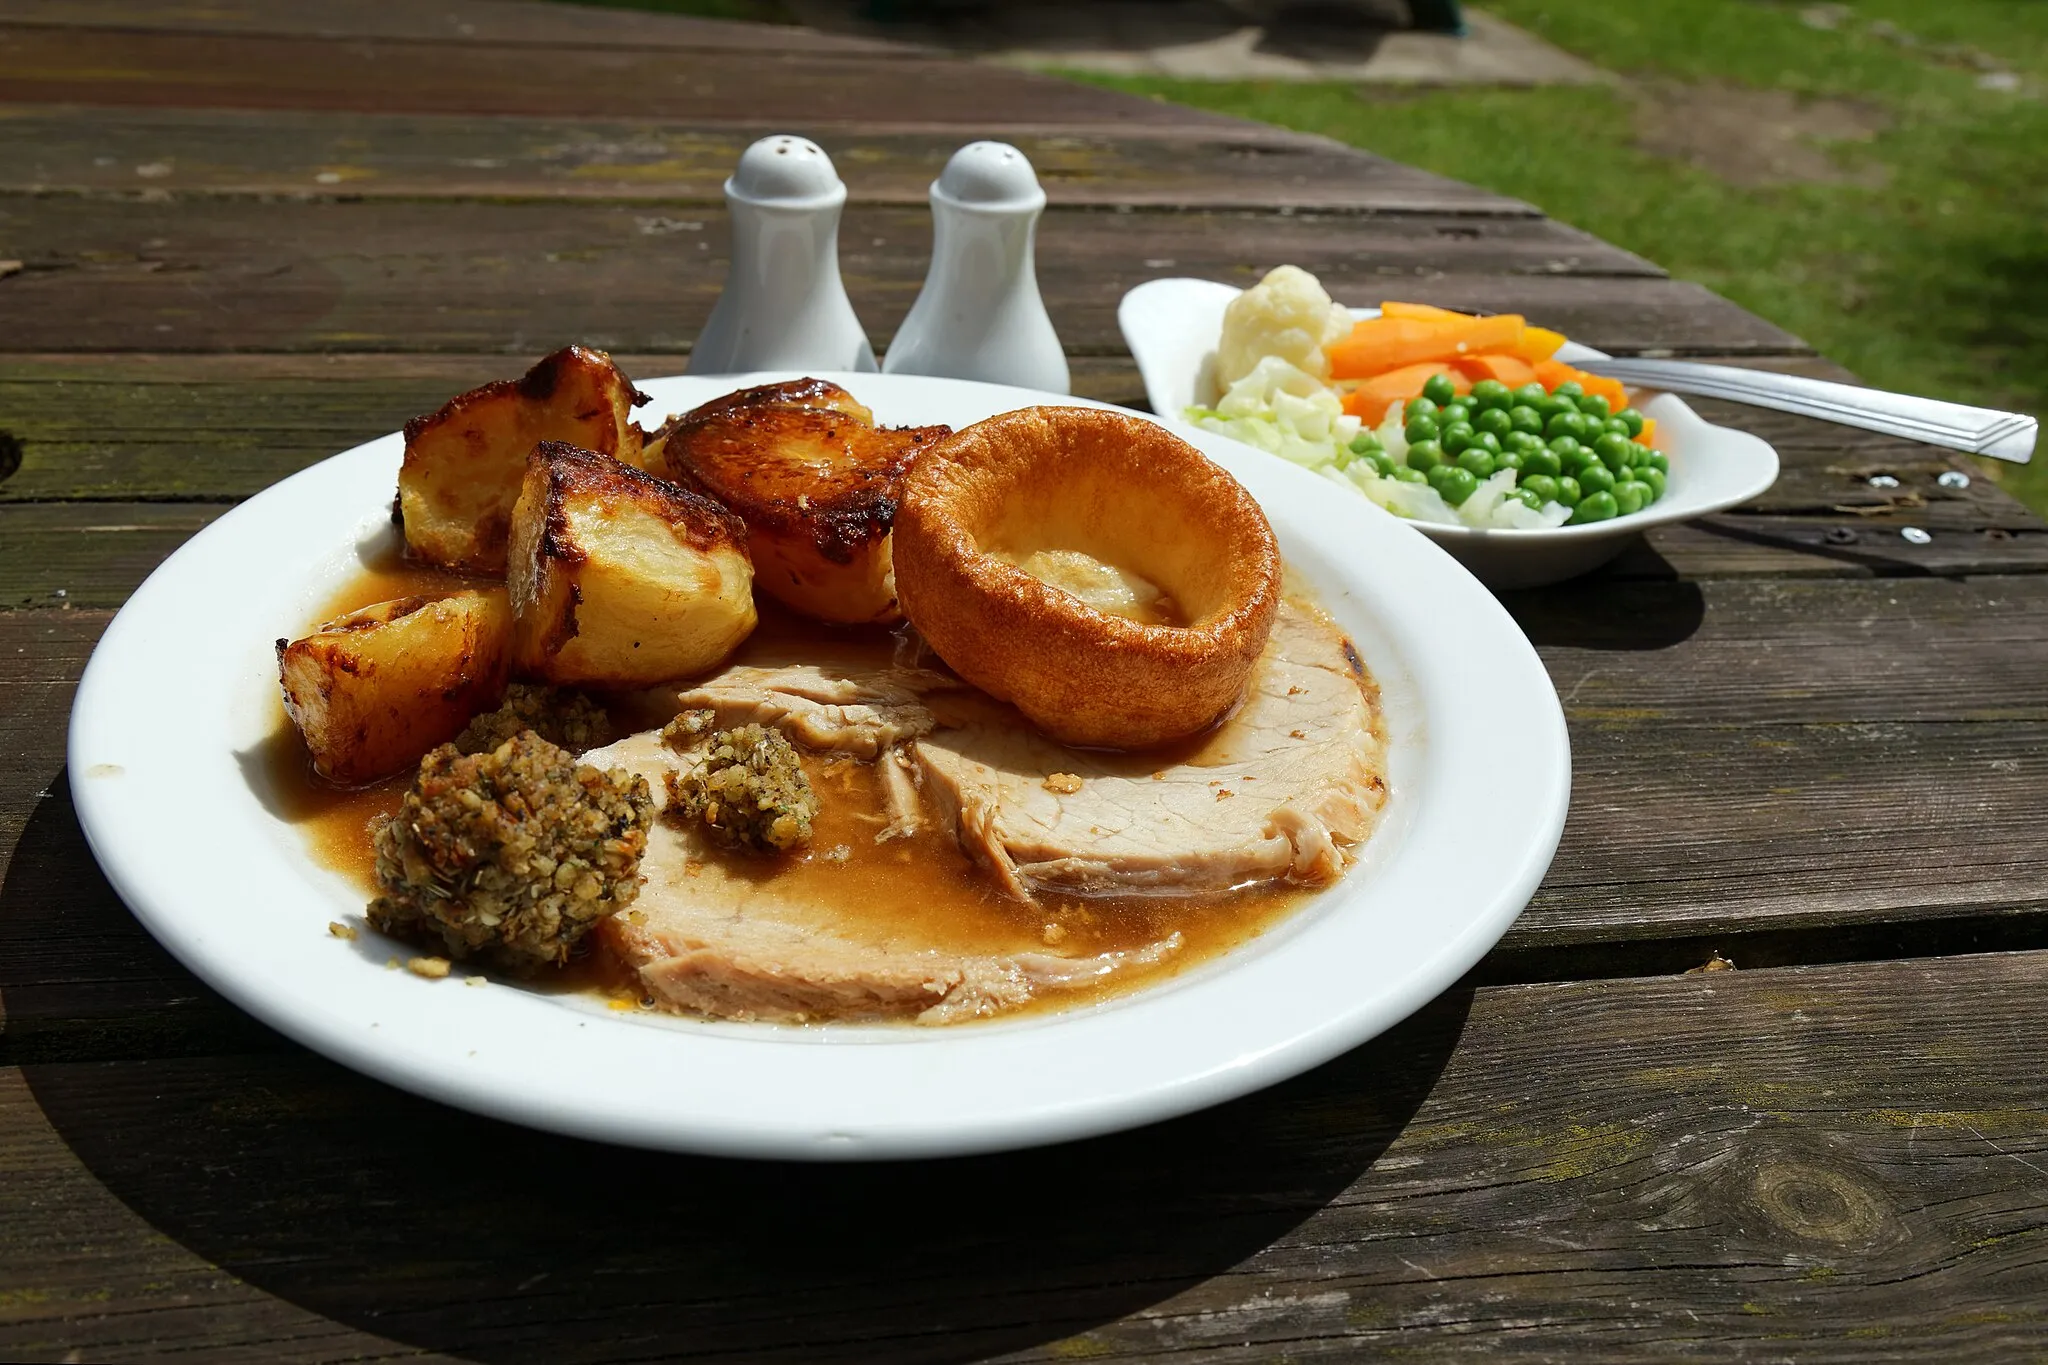 Photo showing: A roast pork Sunday Lunch with roast potatoes, peas, carrots, cauliflower and Yorkshire pudding with stuffing and gravy, in The Crown public house garden at Newgate Street Village (name of road), at Newgate Street, in the civil parish of Hatfield, and the Borough of Welwyn Hatfield, Hertfordshire, England. Camera: Camera: Canon EOS 6D with Canon EF 24-105mm F4L IS USM lens. Software: file lens-corrected and optimized with DxO OpticsPro 10 Elite and Viewpoint 2, and further optimized with Adobe Photoshop CS2.